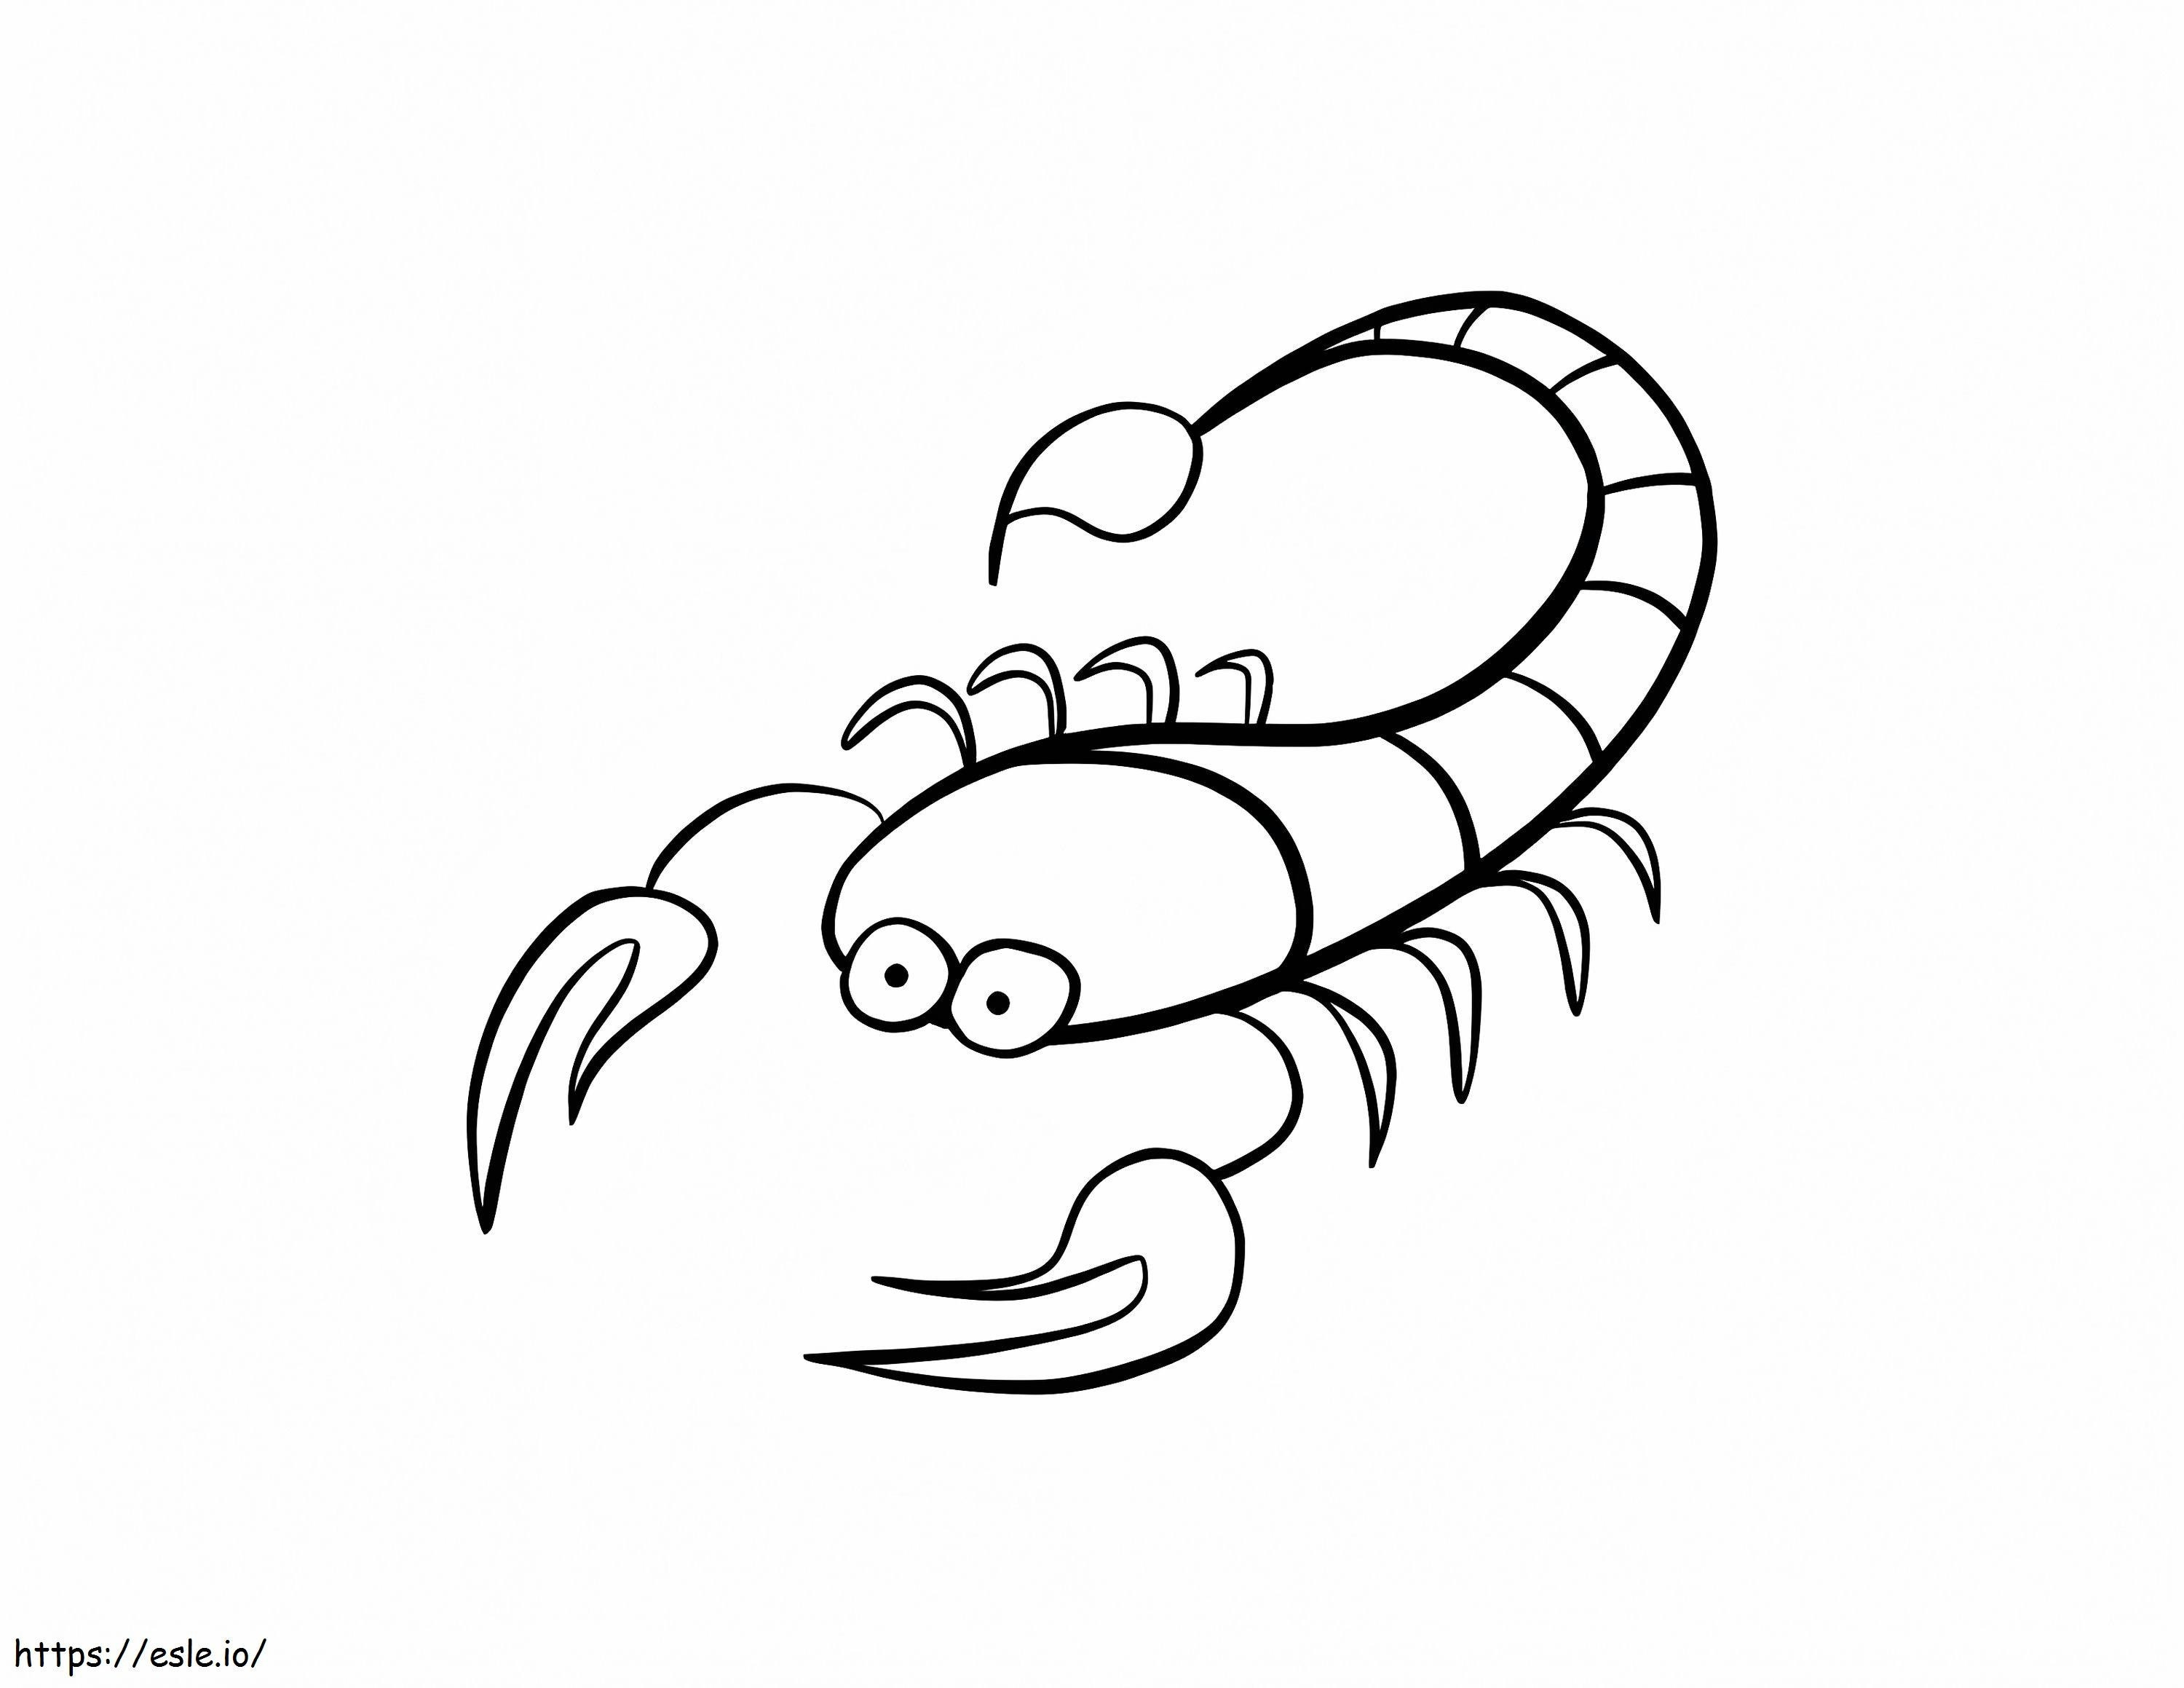 Little Scorpion coloring page